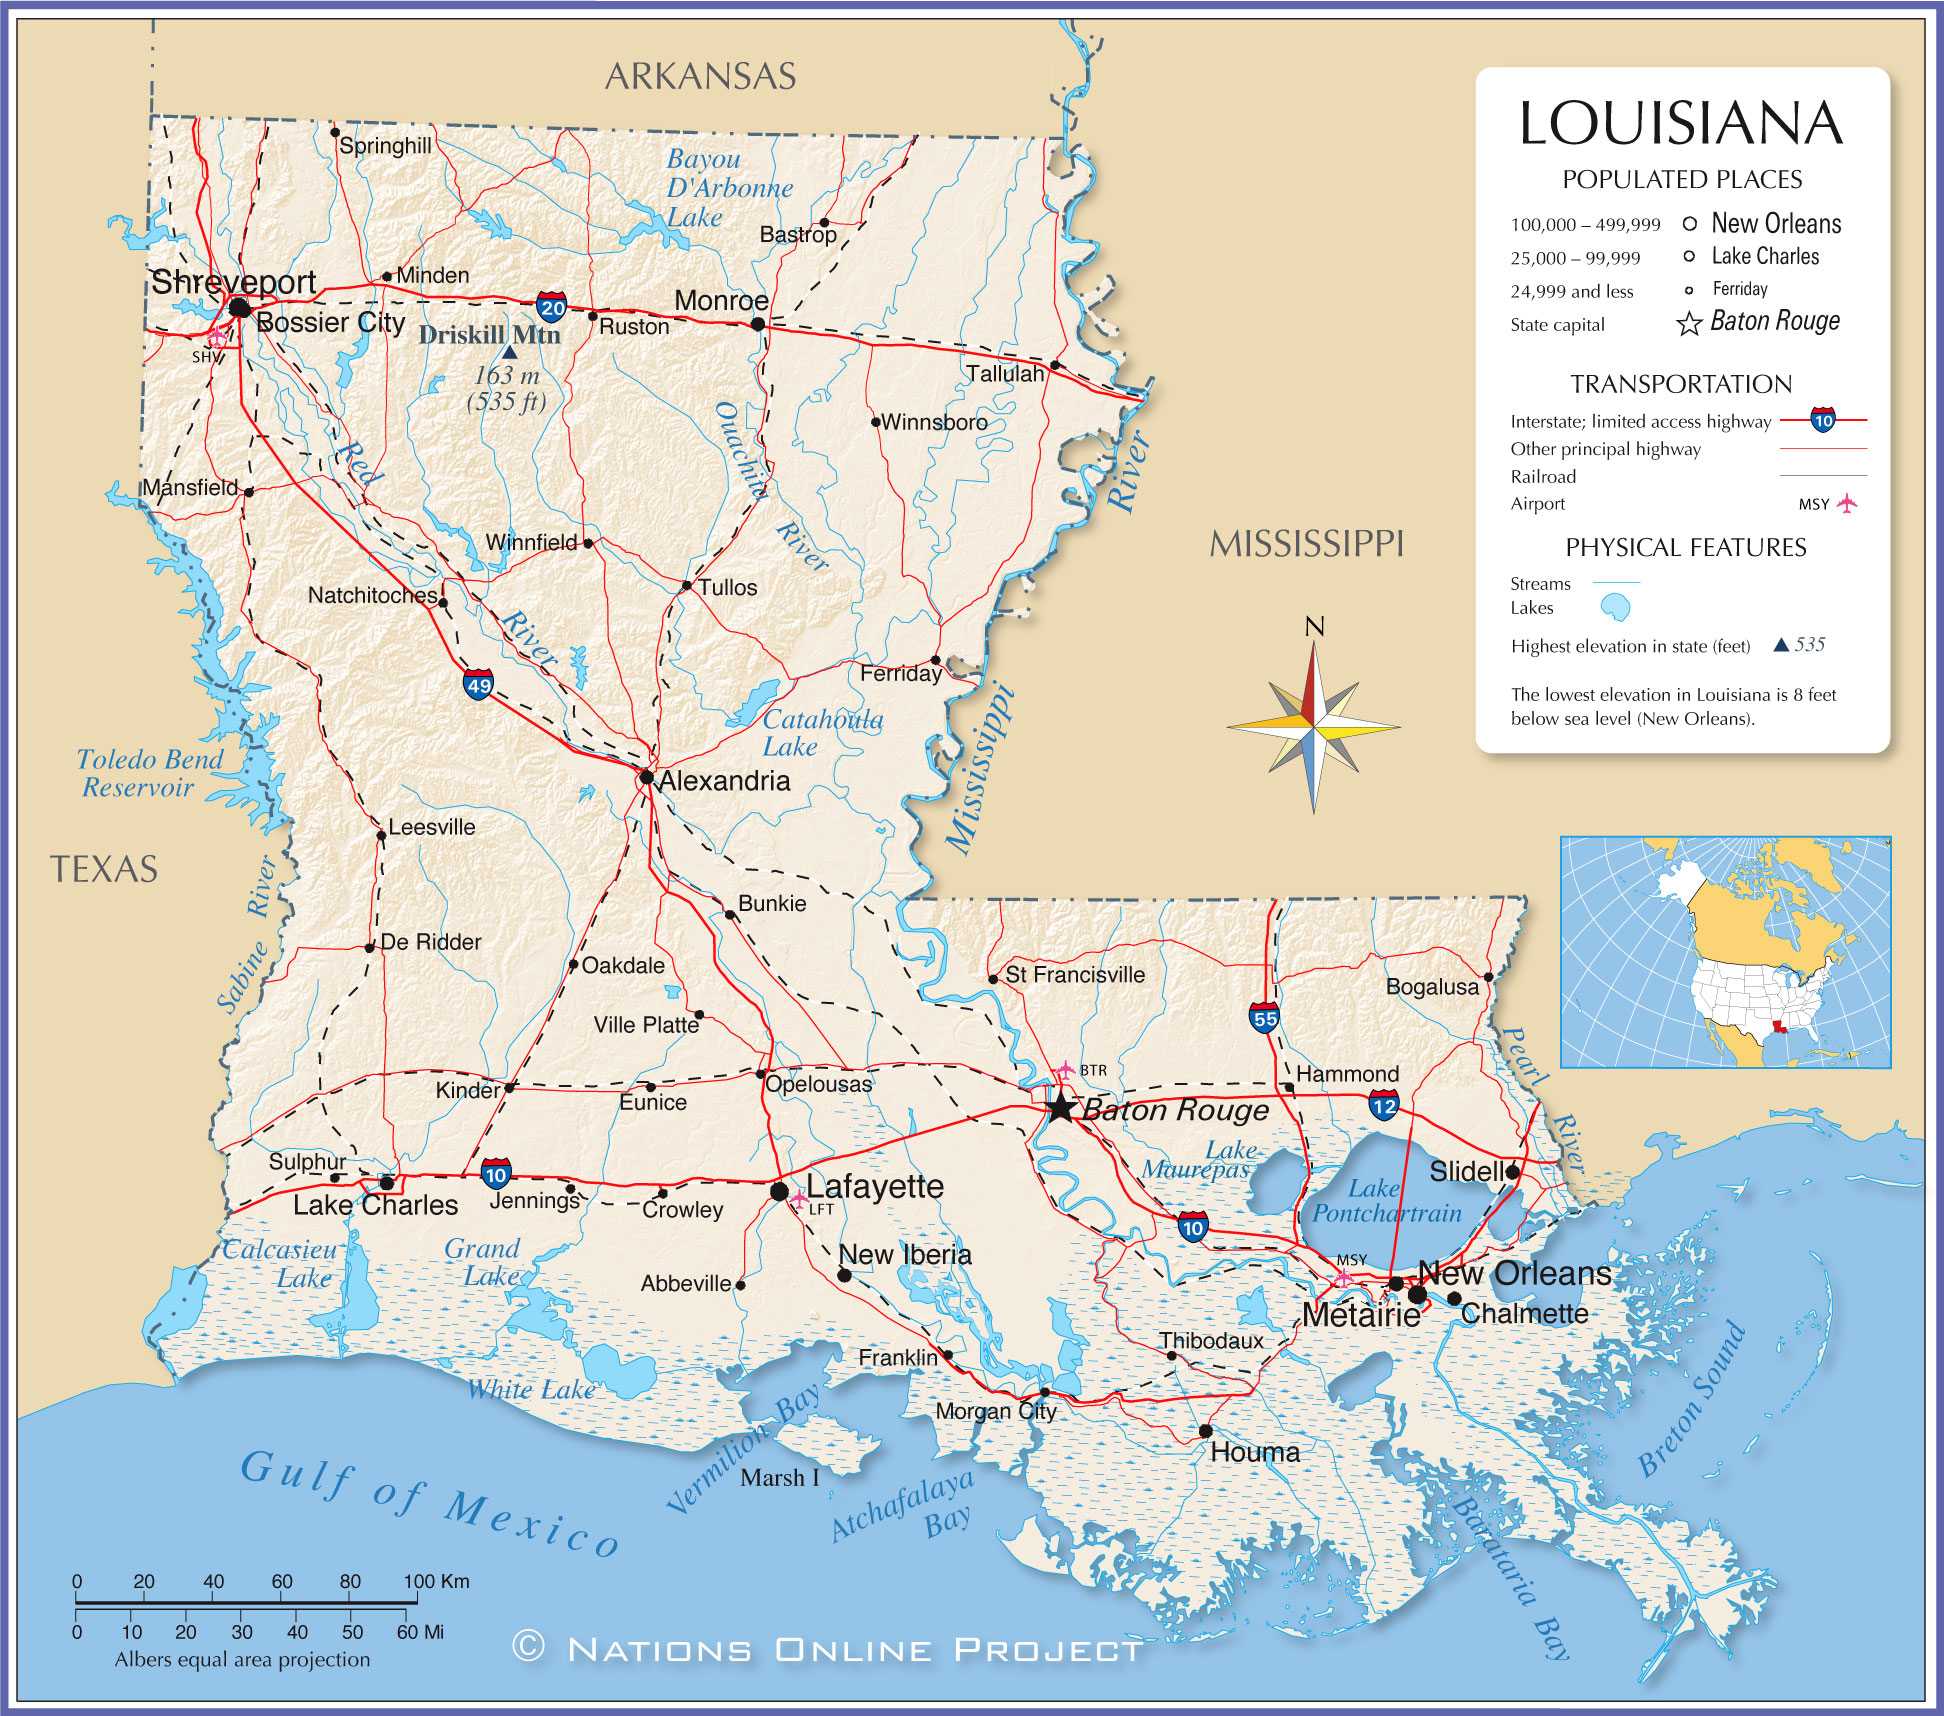 Reference Map of Louisiana